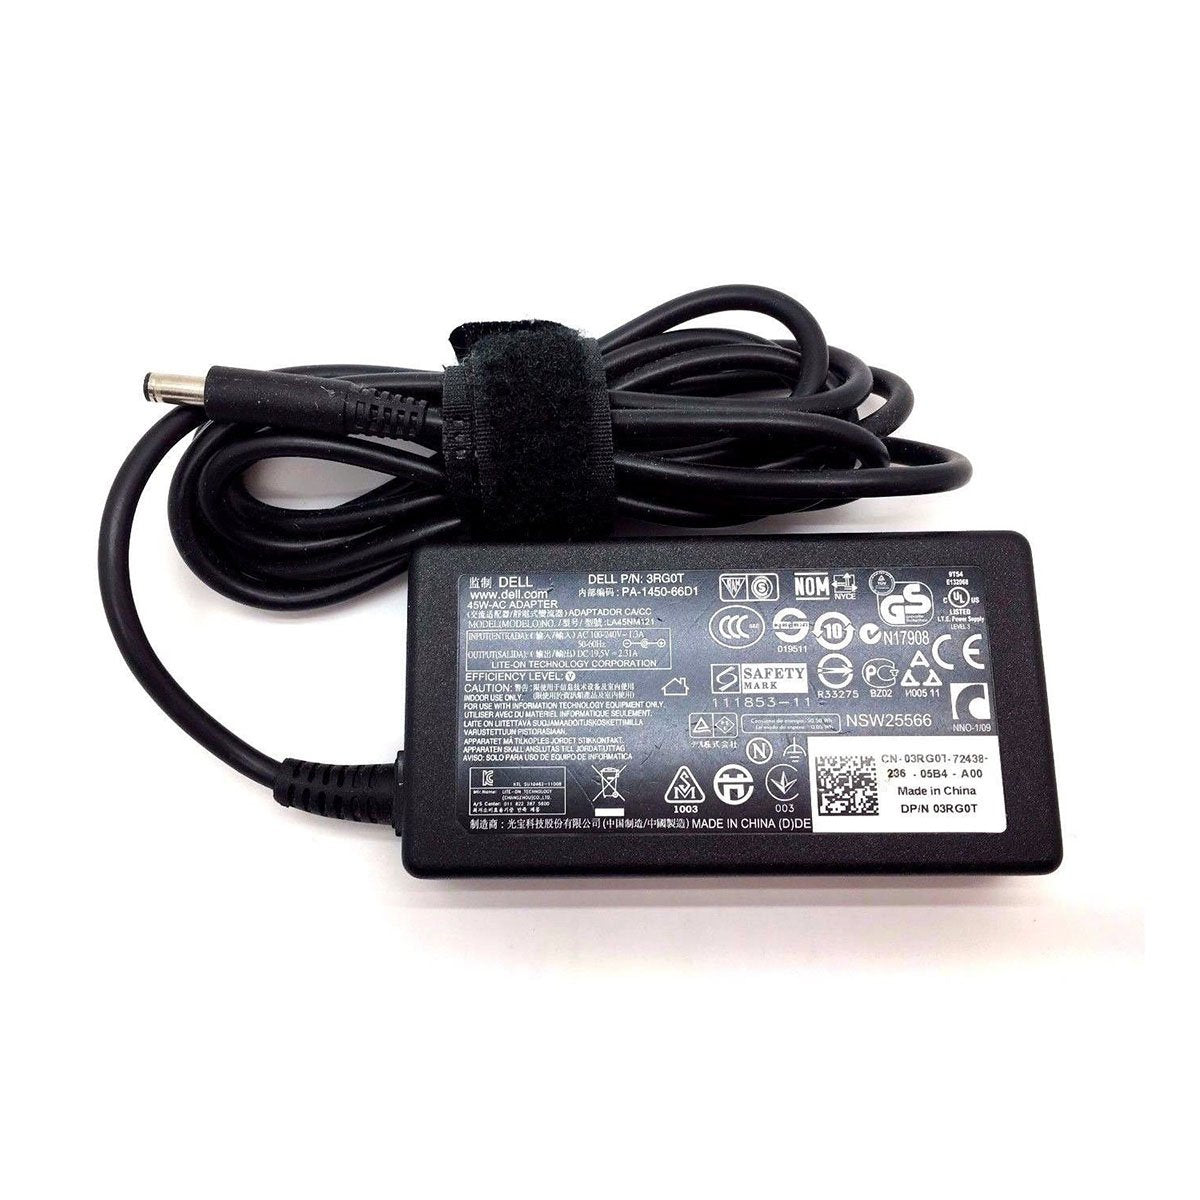 Dell Vostro 13 5370 Original 45W Laptop Charger Adapter With Power Cord 19.5V 4.5mm Pin